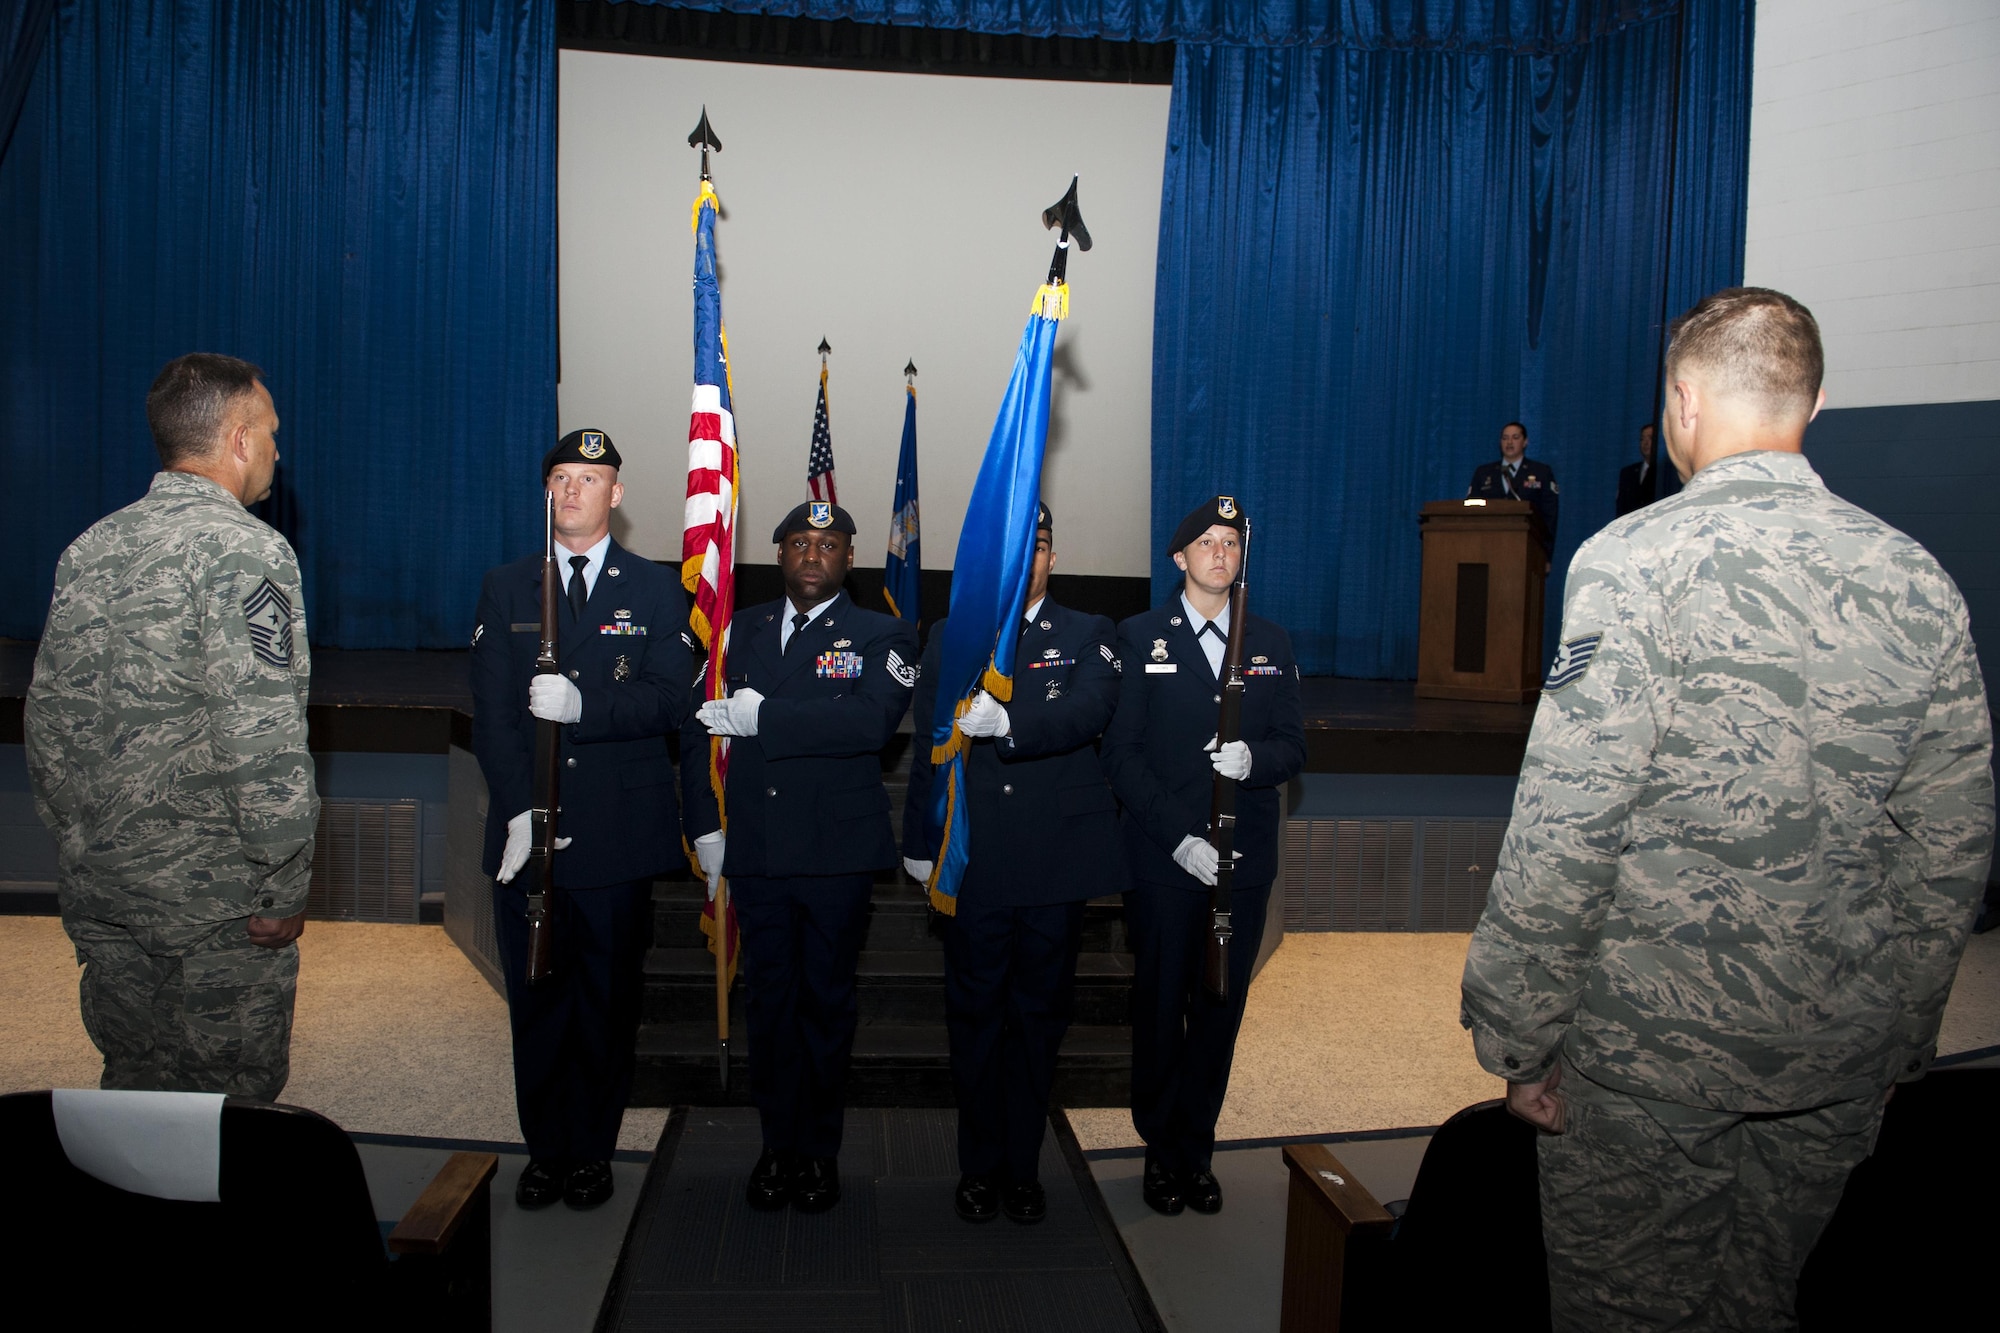 U.S. Air Force Airmen from the 23d Security Forces Squadron present the colors during a retreat ceremony, May 20, 2016, at Moody Air Force Base, Ga. The ceremony was held to honor and remember the lives of fallen Security Forces Airmen as well as law enforcement officers in the local area. (U.S. Air Force photo by Airman 1st Class Lauren M. Hunter/Released)